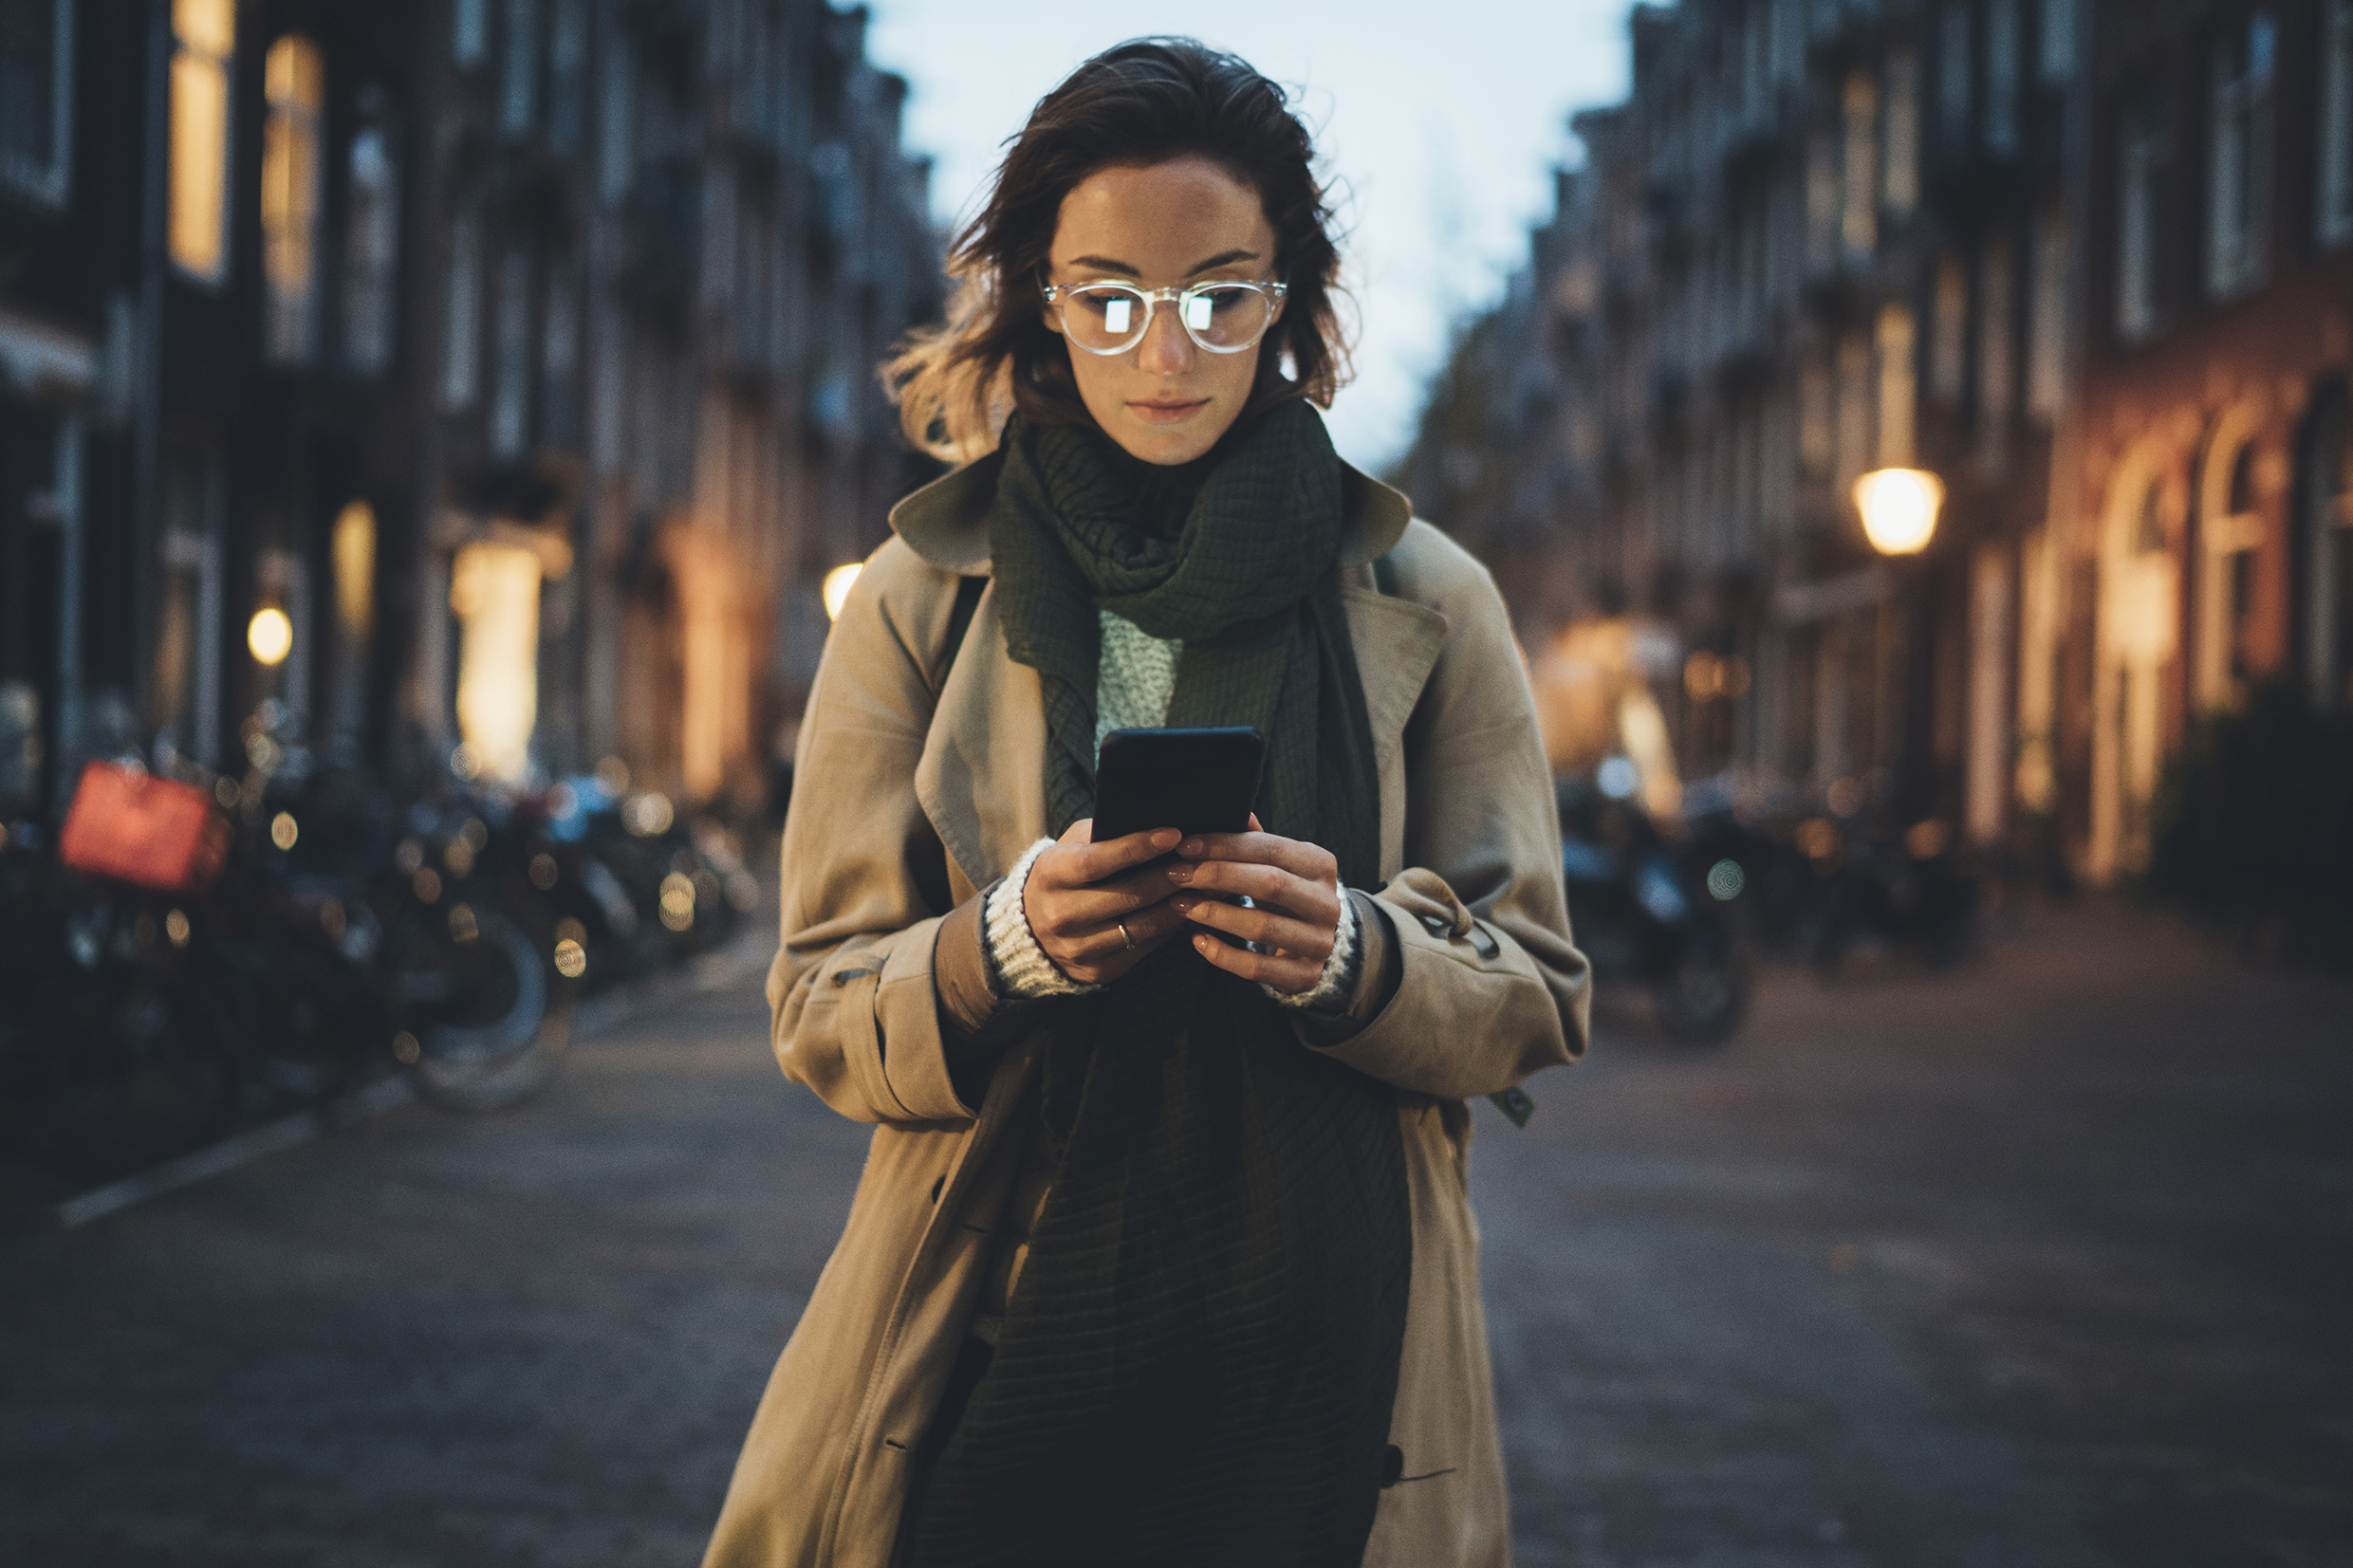 Image shows a London street scene at dusk with a young woman walking along looking at her mobile phone